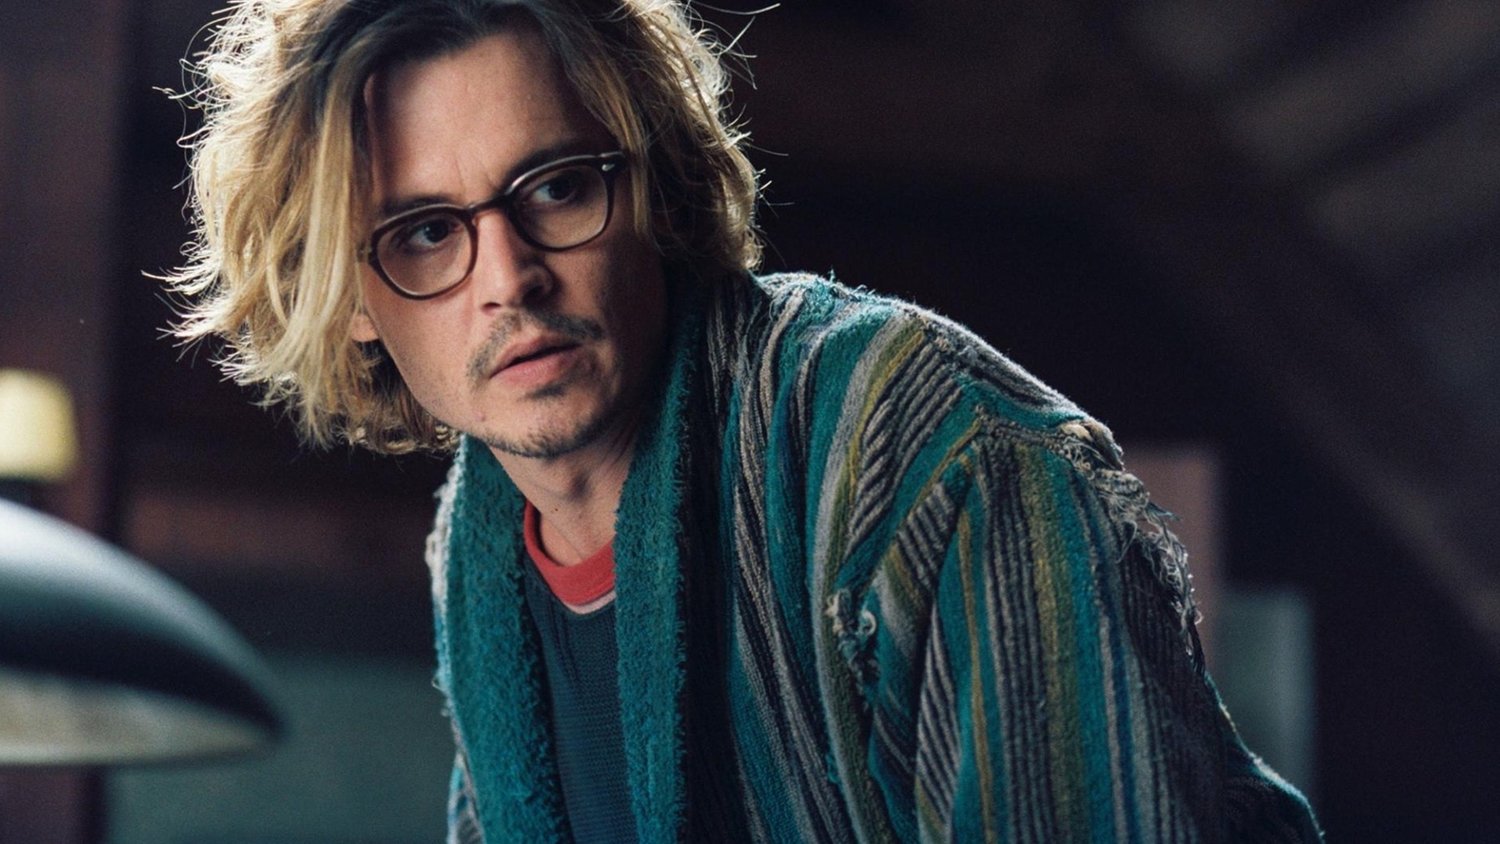 What was the name of Johnny Depp's breakthrough role?